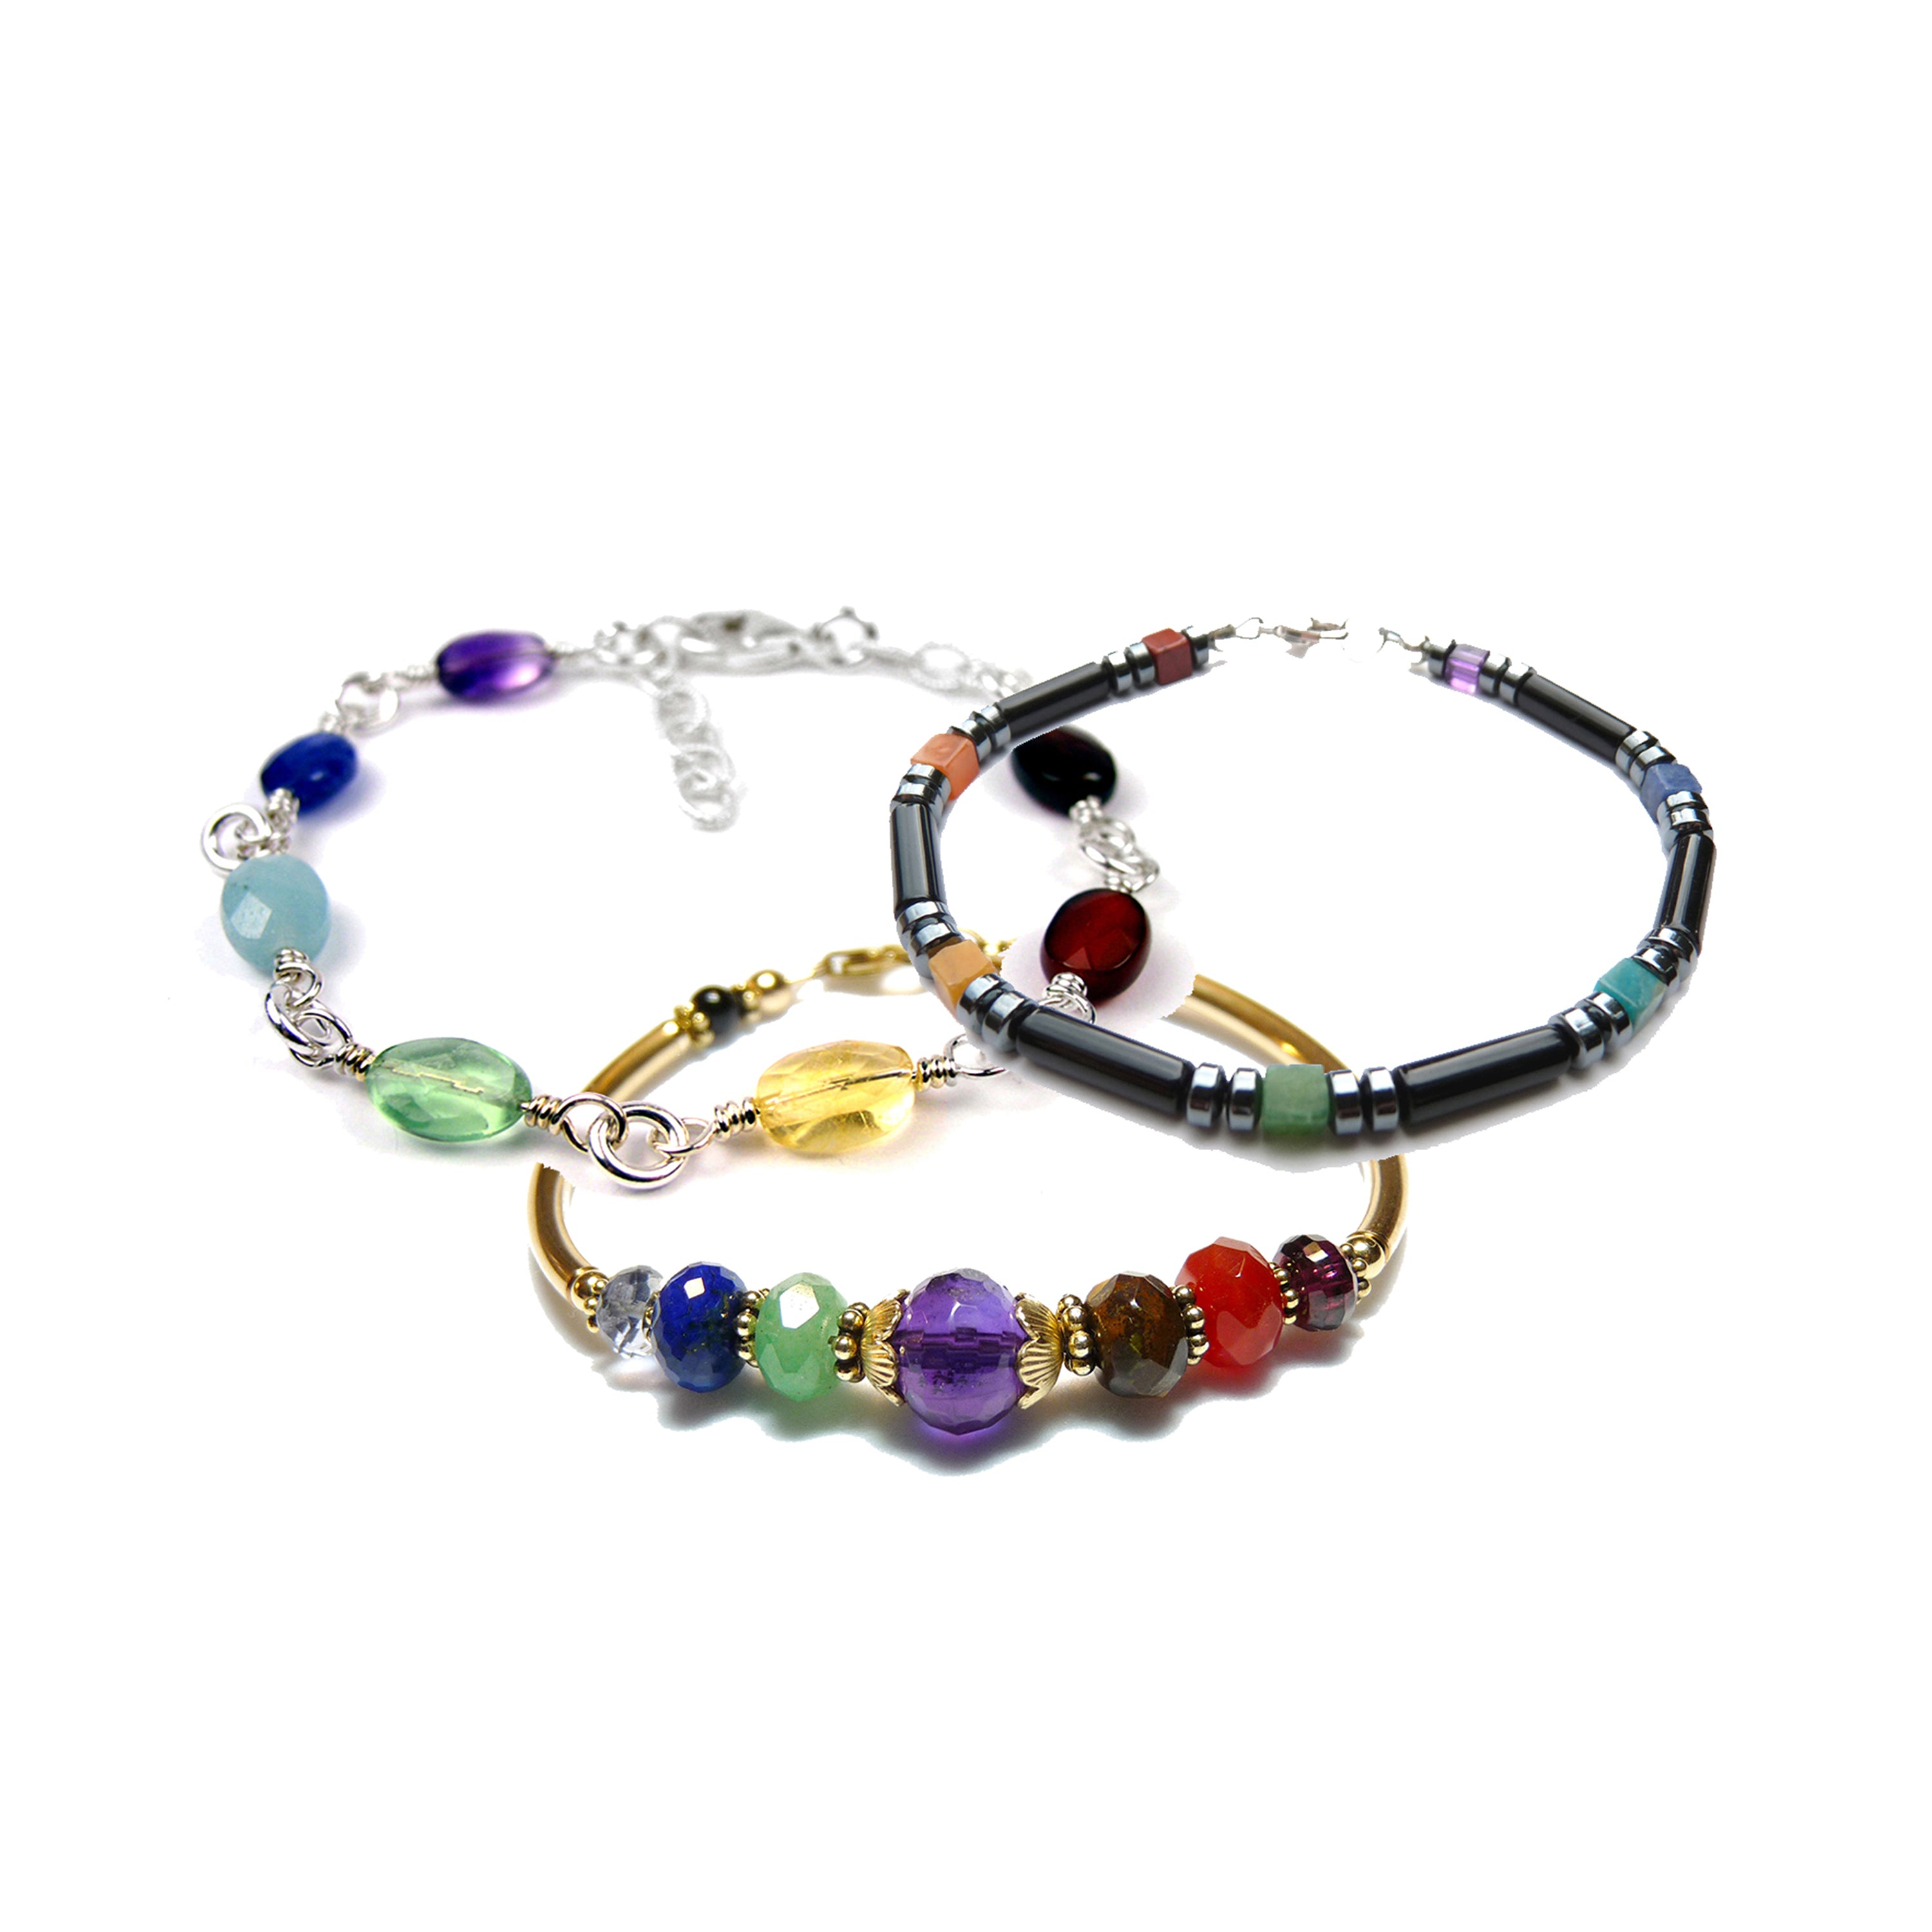 We have an extensive line of Authentic Chakra Bracelets.... over 50 designs! 